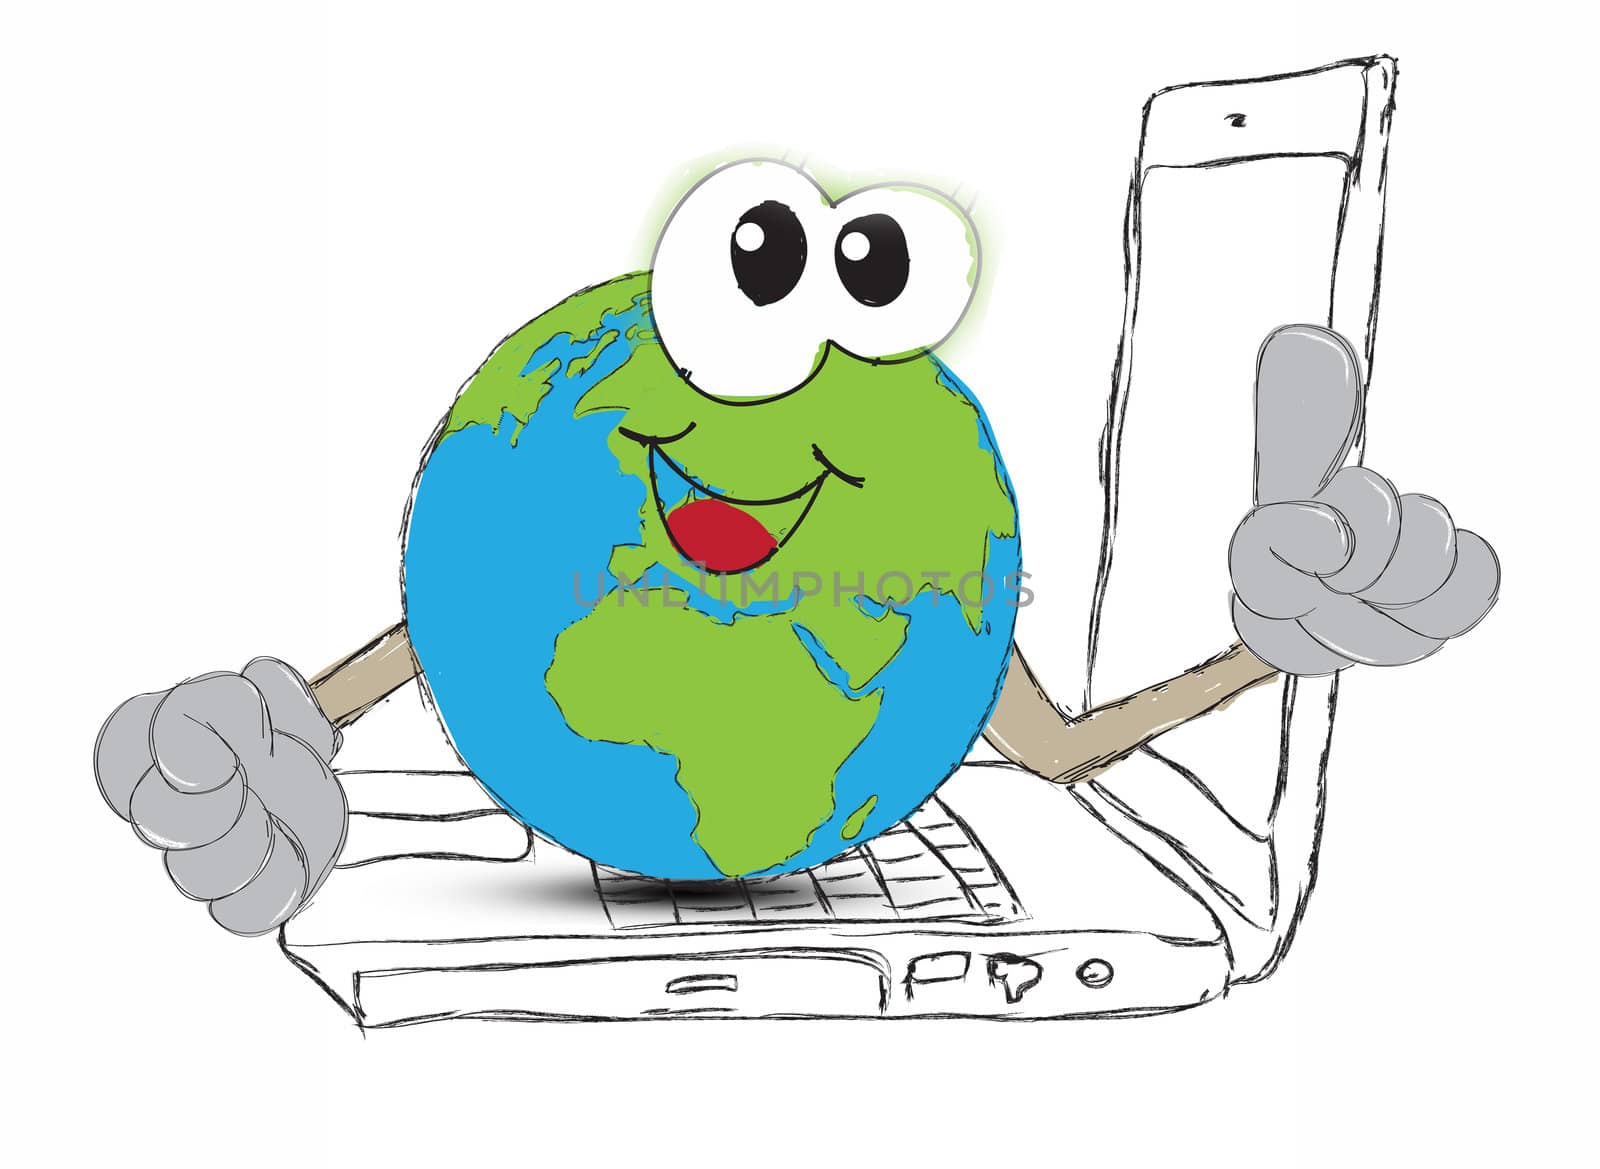 drawing An Earth globe as the world on your laptop computer keyb by rufous